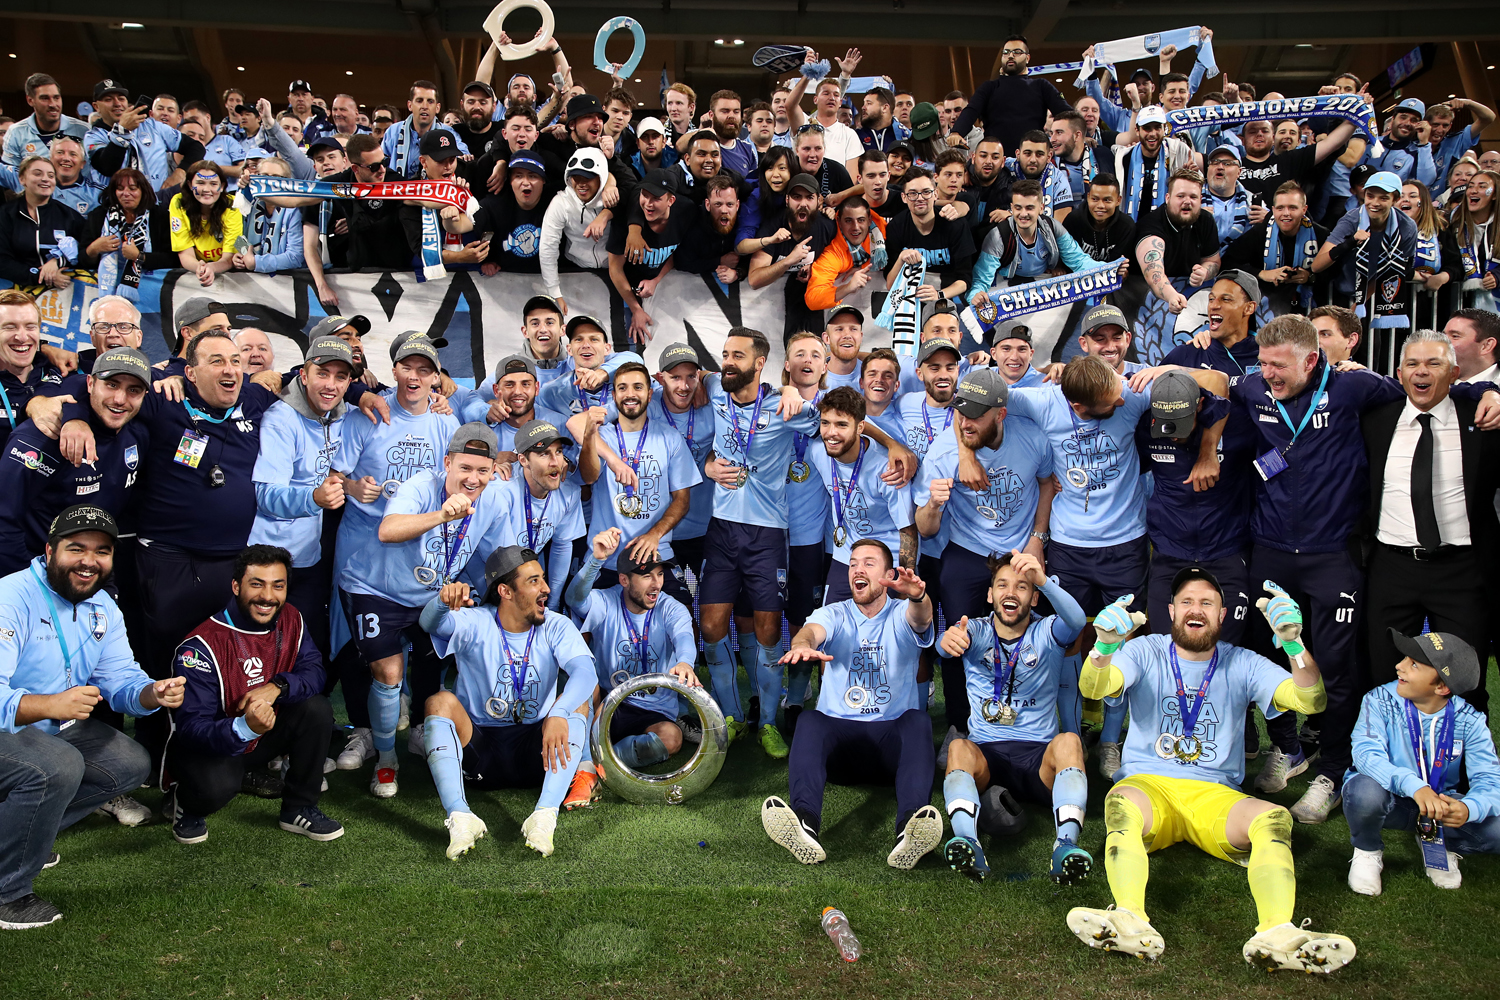 Sydney FC Players Staff & Fans Celebrate Win In Perth